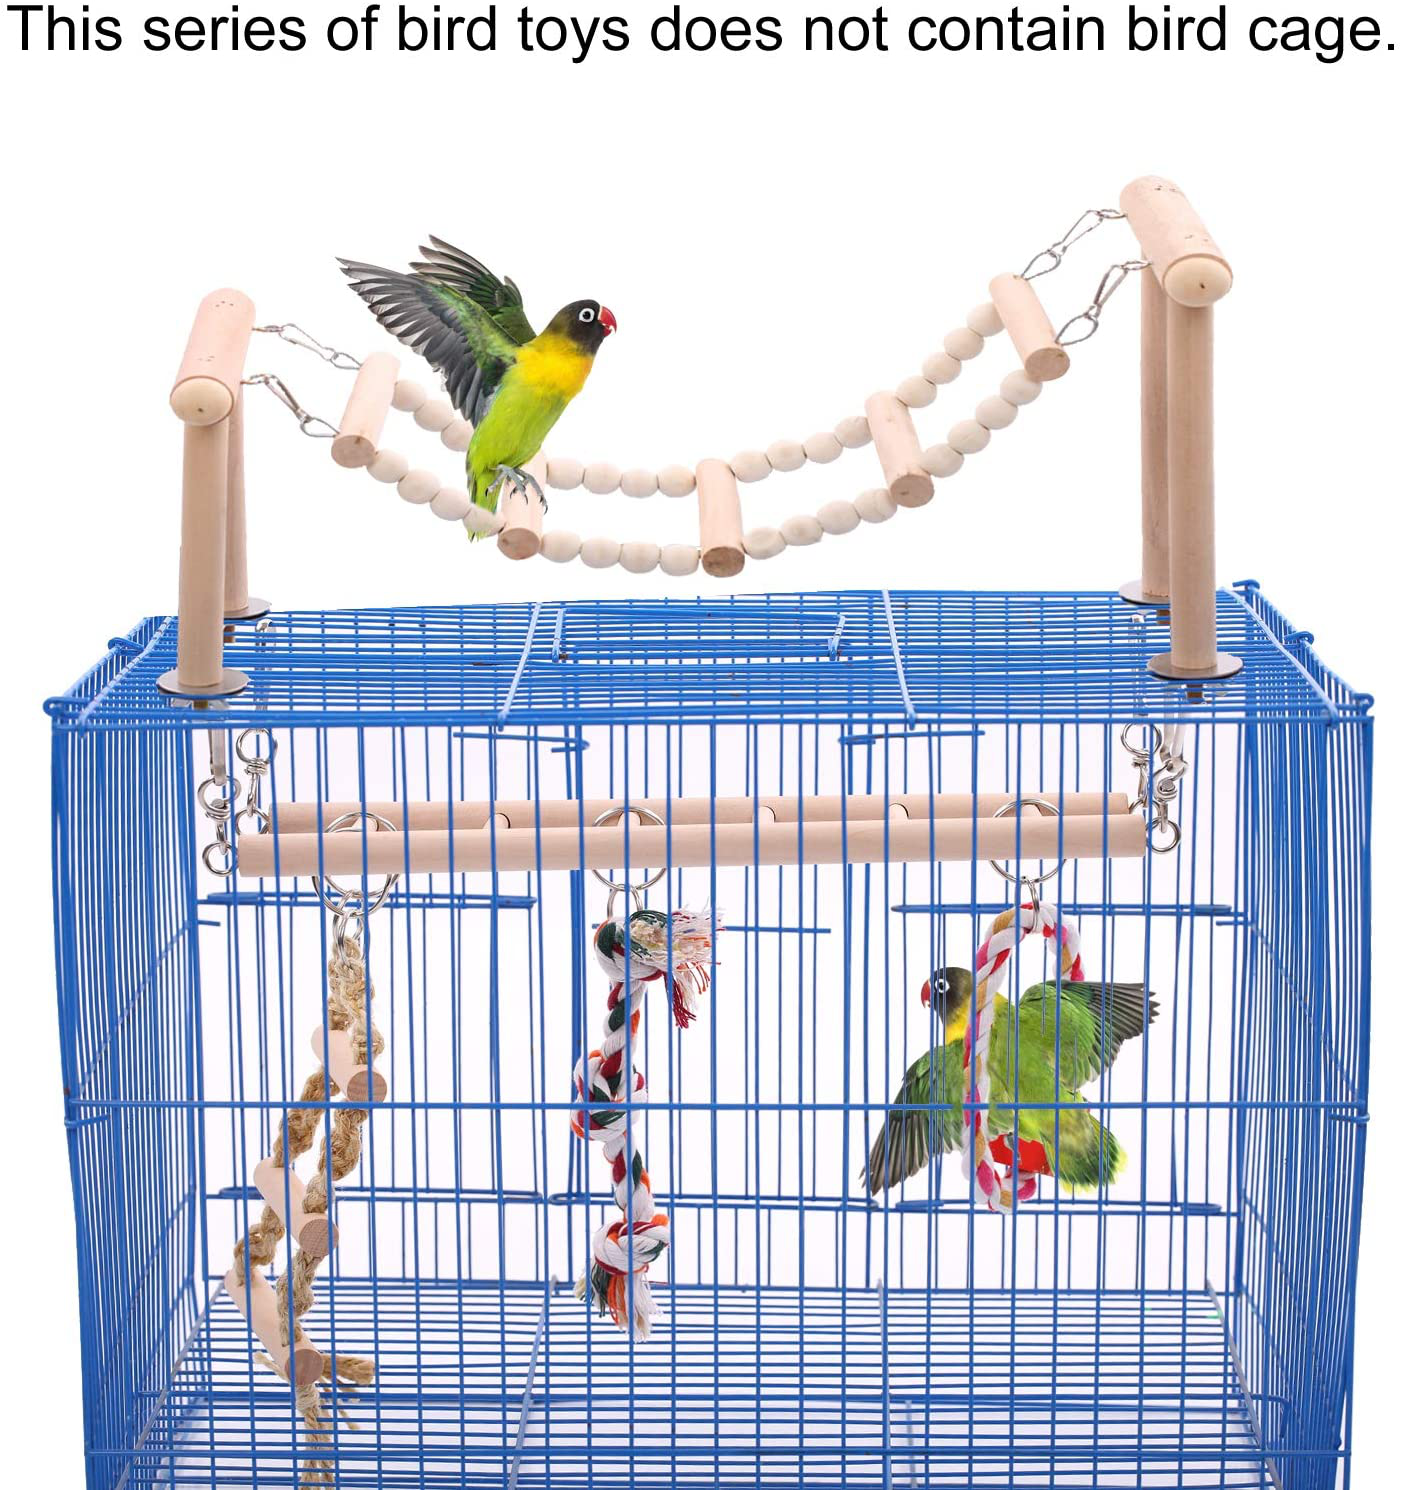 SAWMONG Bird Parrot Toys Bird Perch Stand Pet Birds Swing Climbing Ladder with Chewing Toys Playground Accessories for Small Parakeets Cockatiels Conures Lovebirds